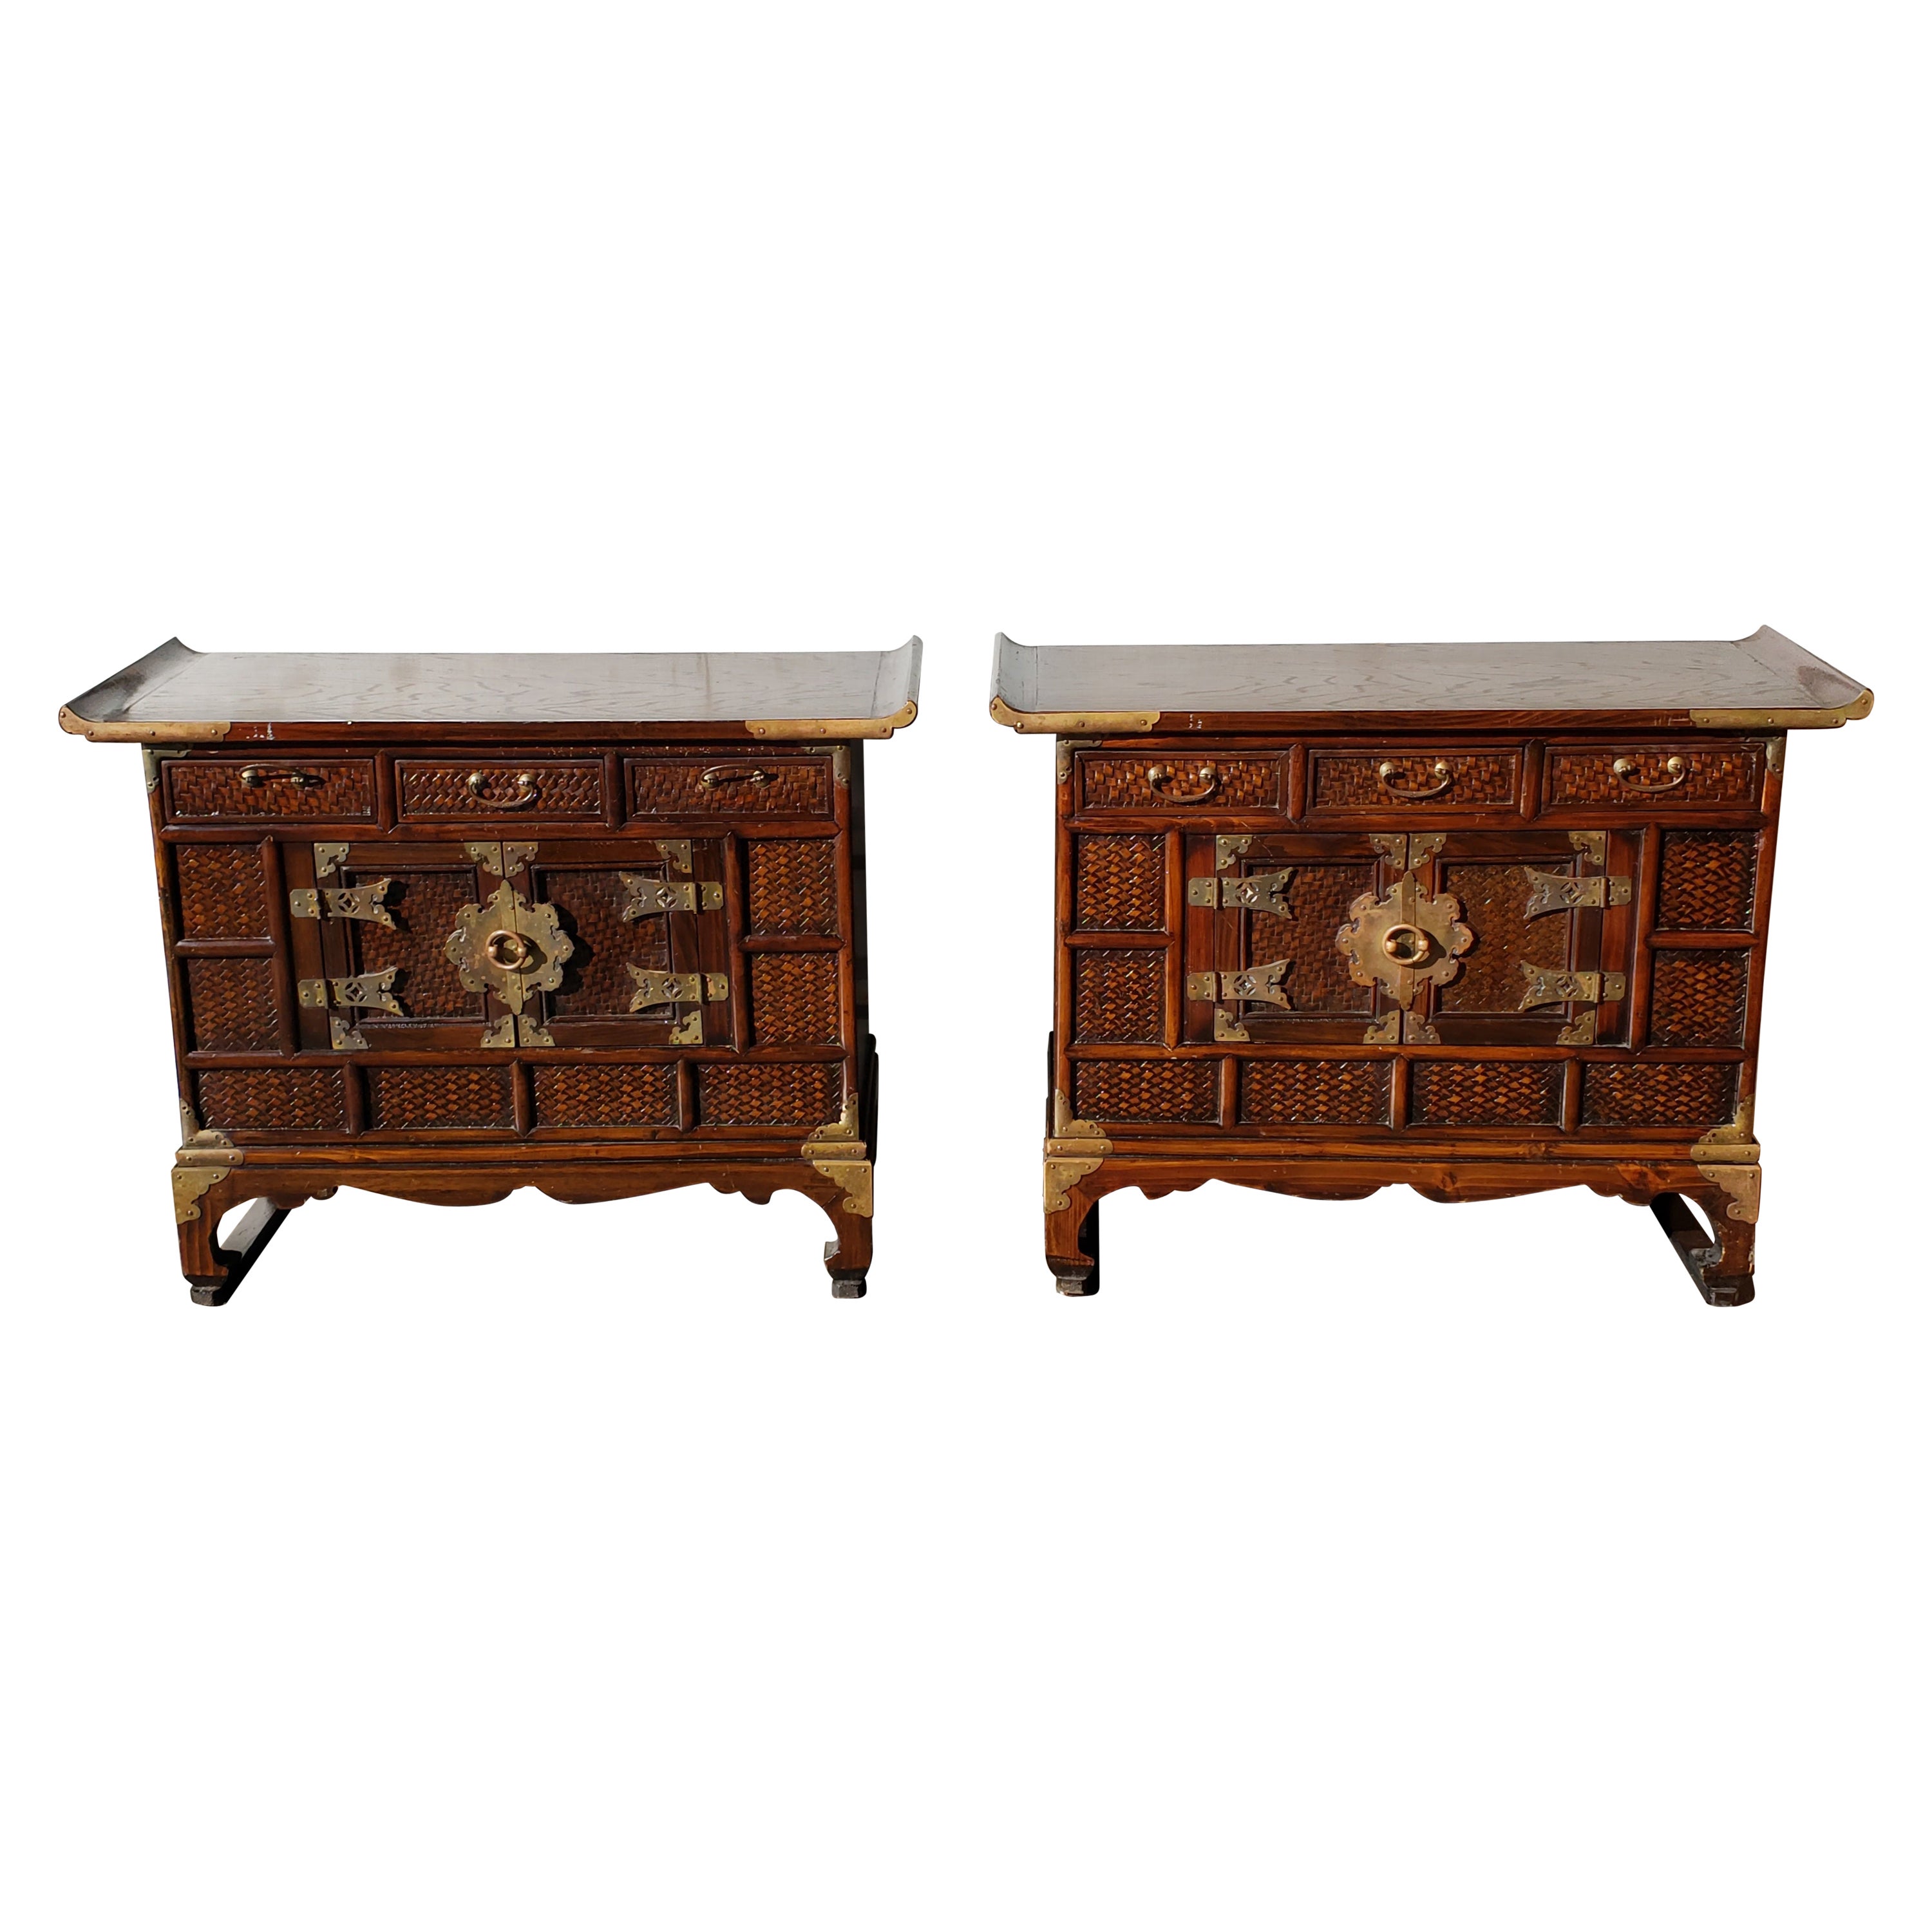 Asian Scholar's Bamboo and Braided Wicker Chests / Side Tables, C 1940s, a Pair For Sale